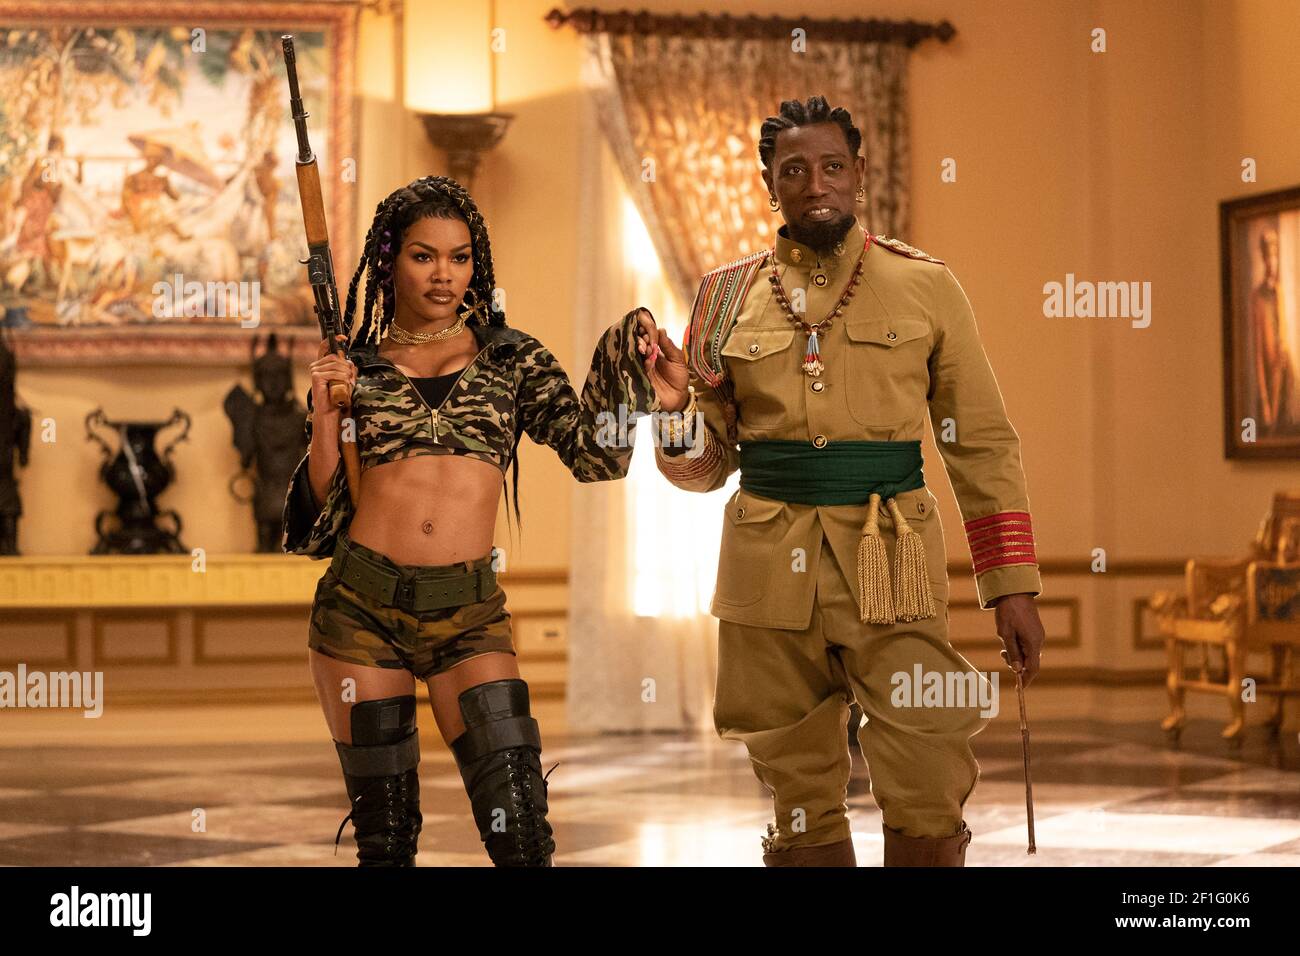 Coming 2 America (2021) directed by Craig Brewer and starring Wesley Snipes as General Izzi and Teyana Taylor as Bopoto in this sequel to the 1988 Coming to America. Stock Photo